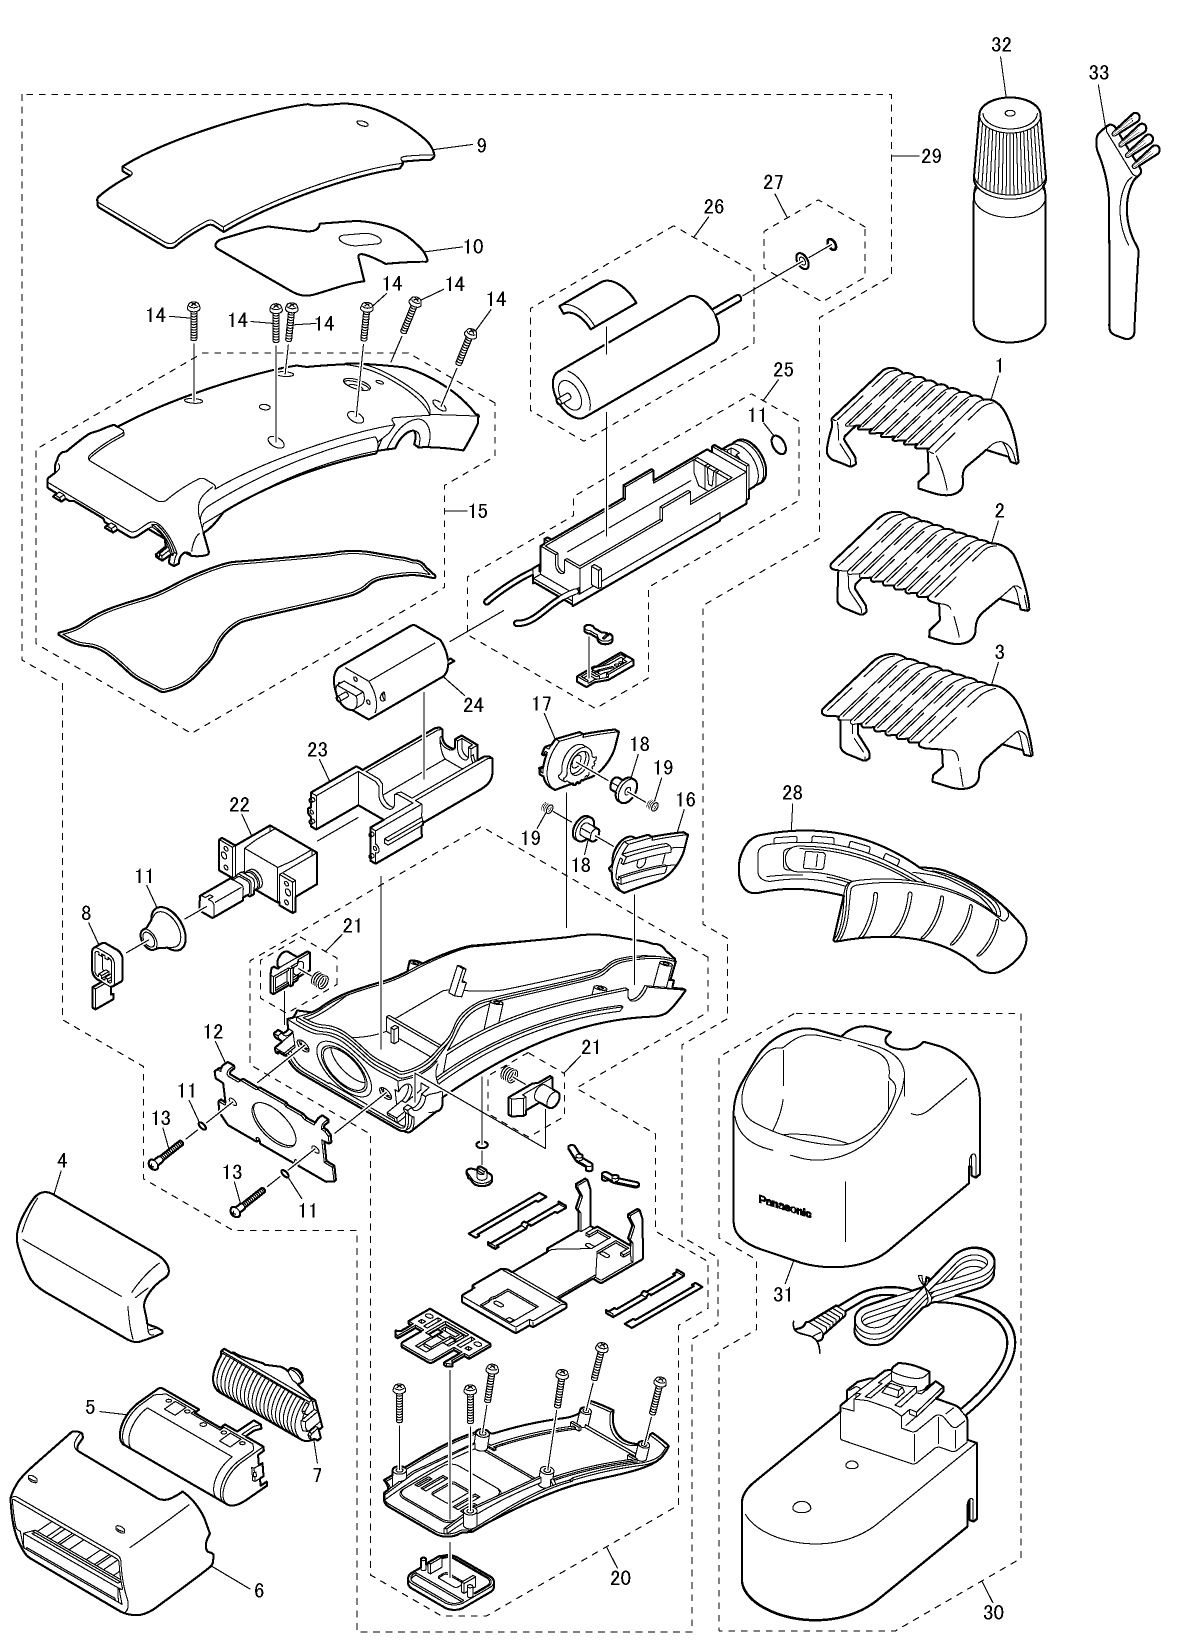 ES-2263: Exploded View